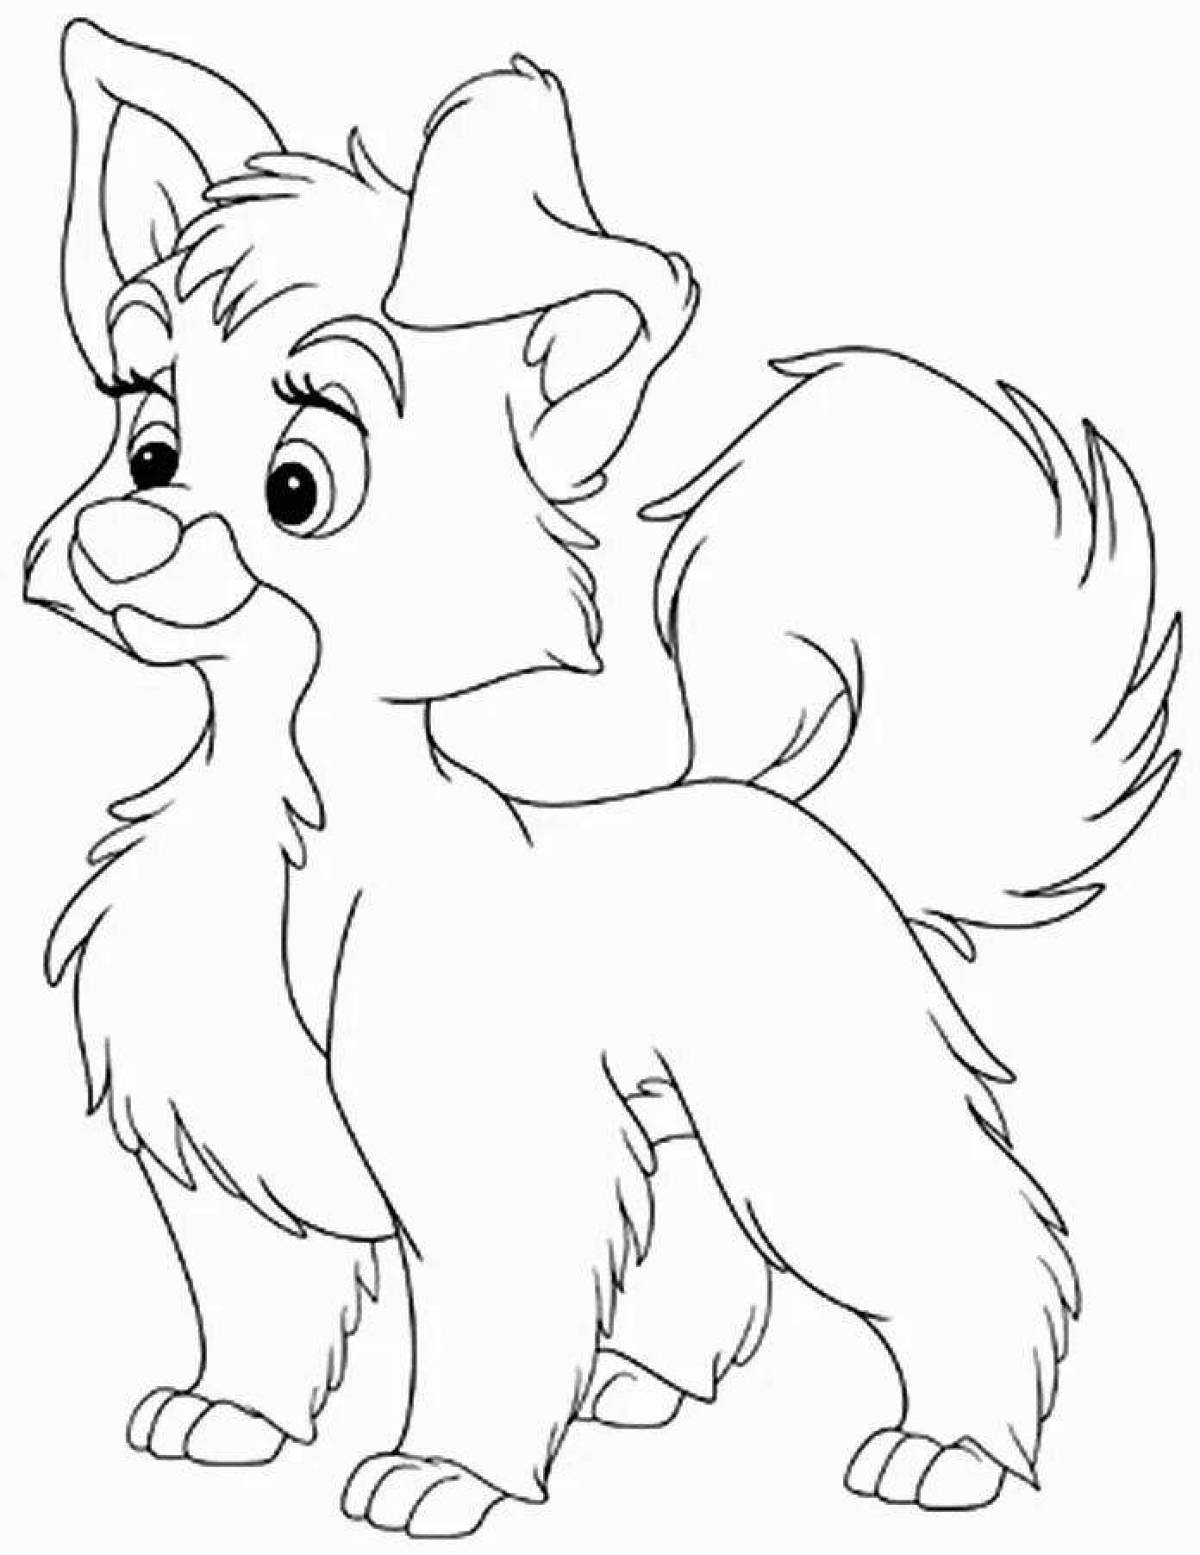 Coloring page of funny cartoon animals